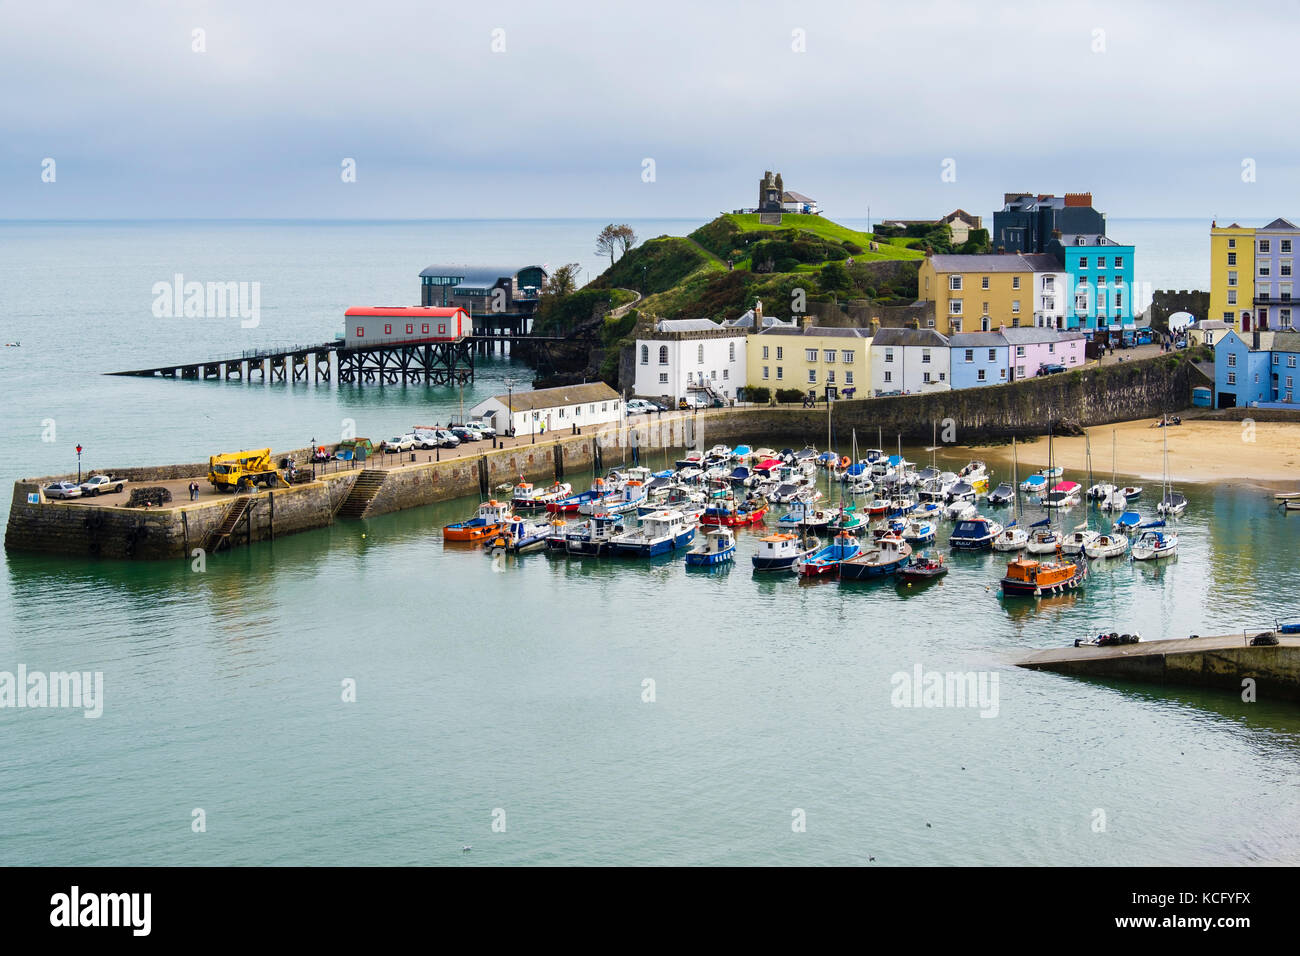 High view of old fishing harbour at high tide in Pembrokeshire Coast National Park. Tenby, Carmarthen Bay, Pembrokeshire, Wales, UK, Great Britain Stock Photo